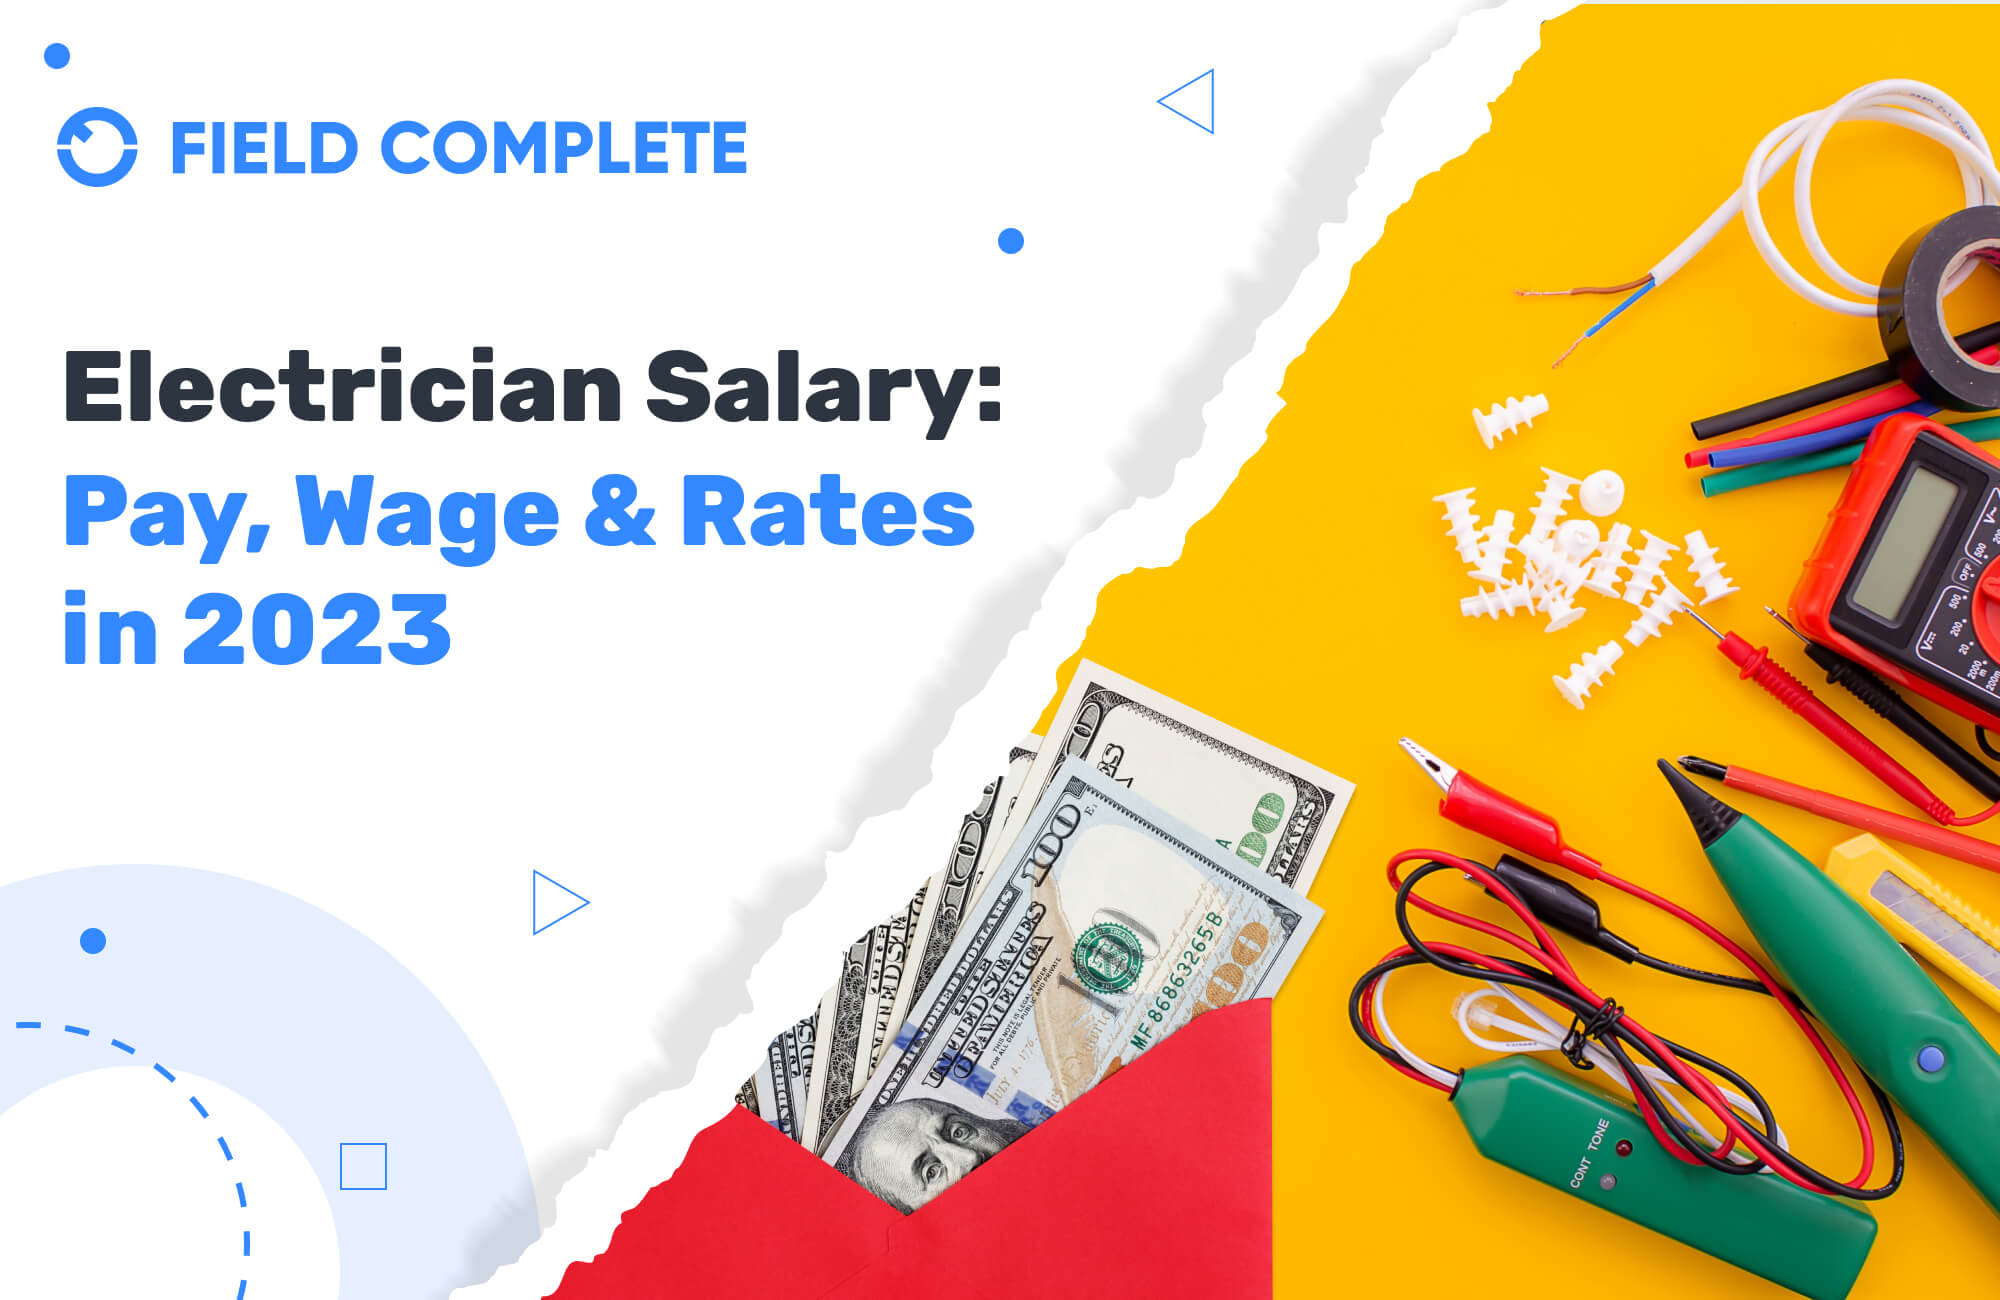 Electrician Salary Pay, Wage & Rates in 2023